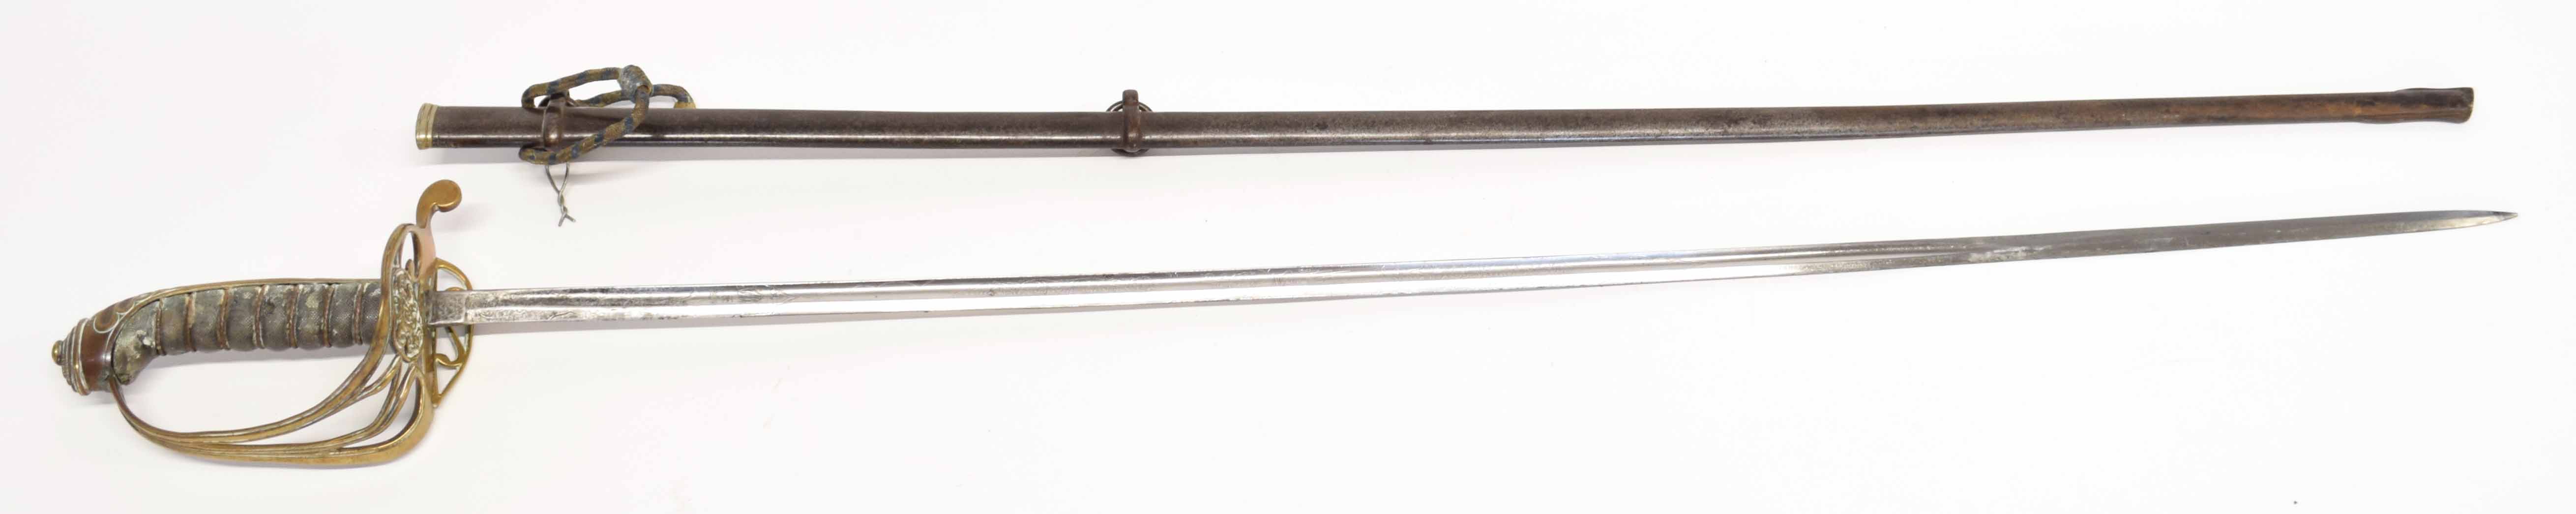 Unusual small version of 1822 pattern Victorian sword with fish-skin coloured grip, Victorian cipher - Image 4 of 7